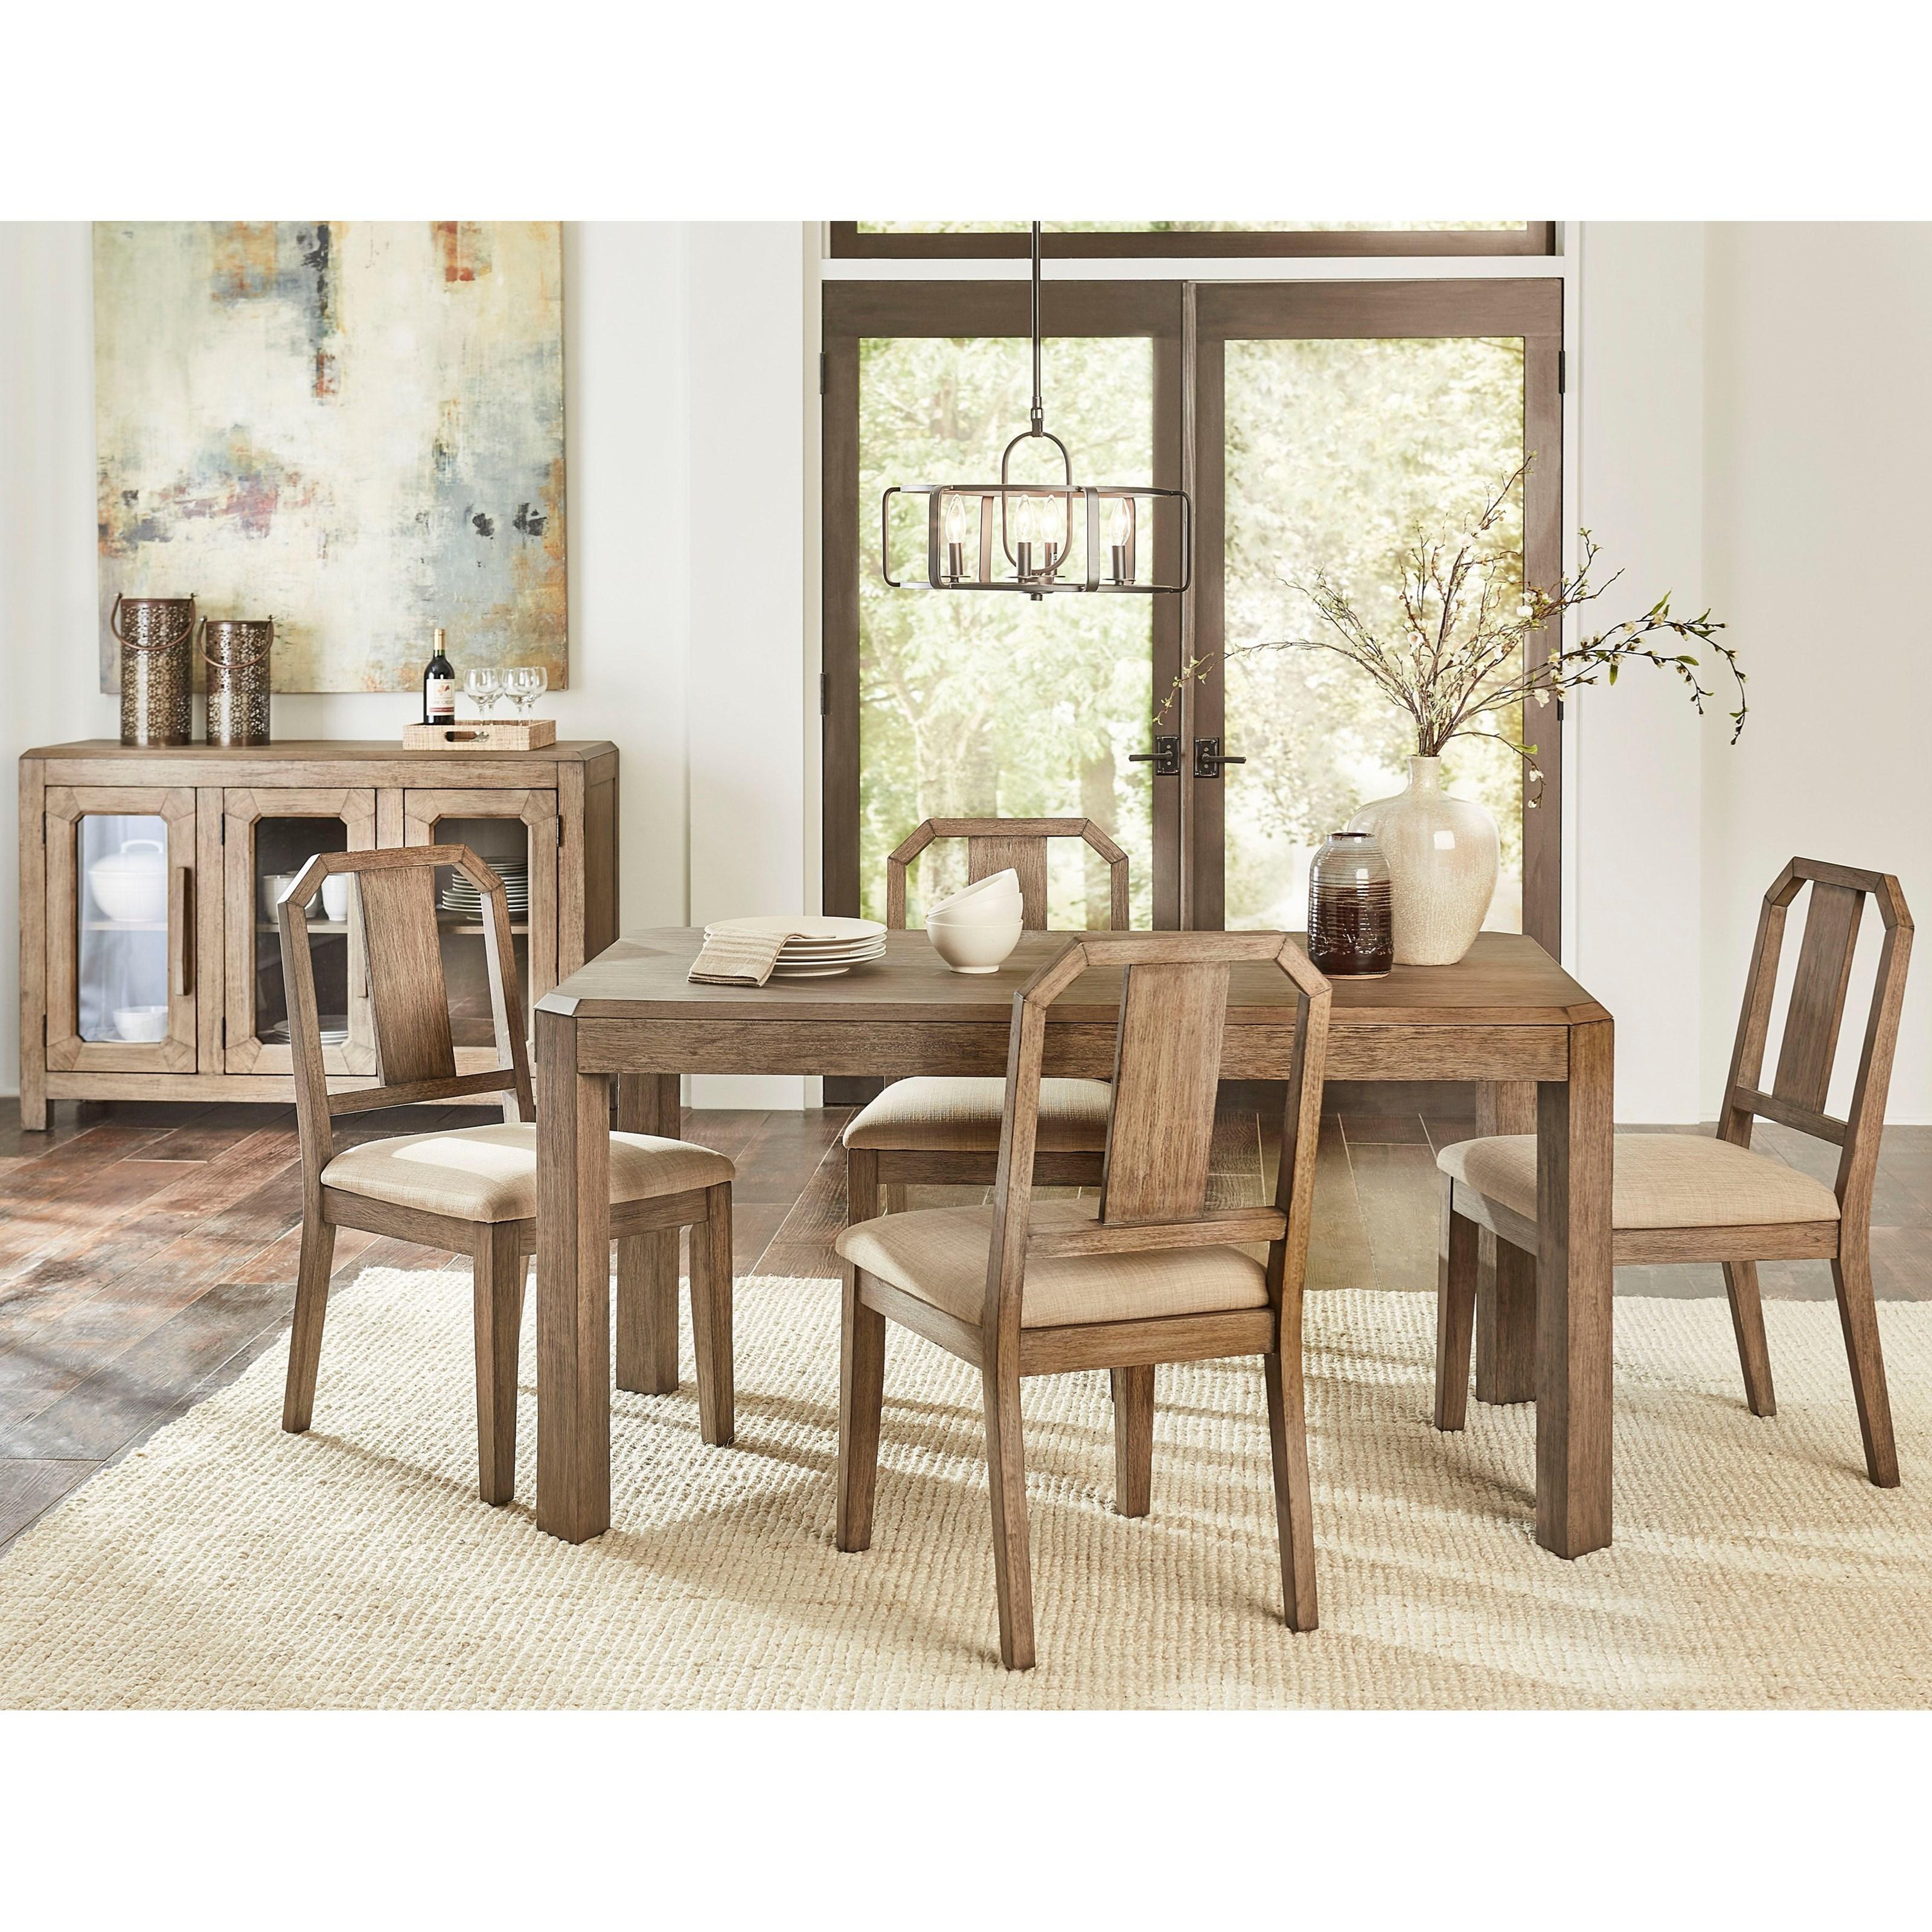 Transitional Dining Table Set ACADIA GHCL60-6PC in Toffee, Beige Fabric